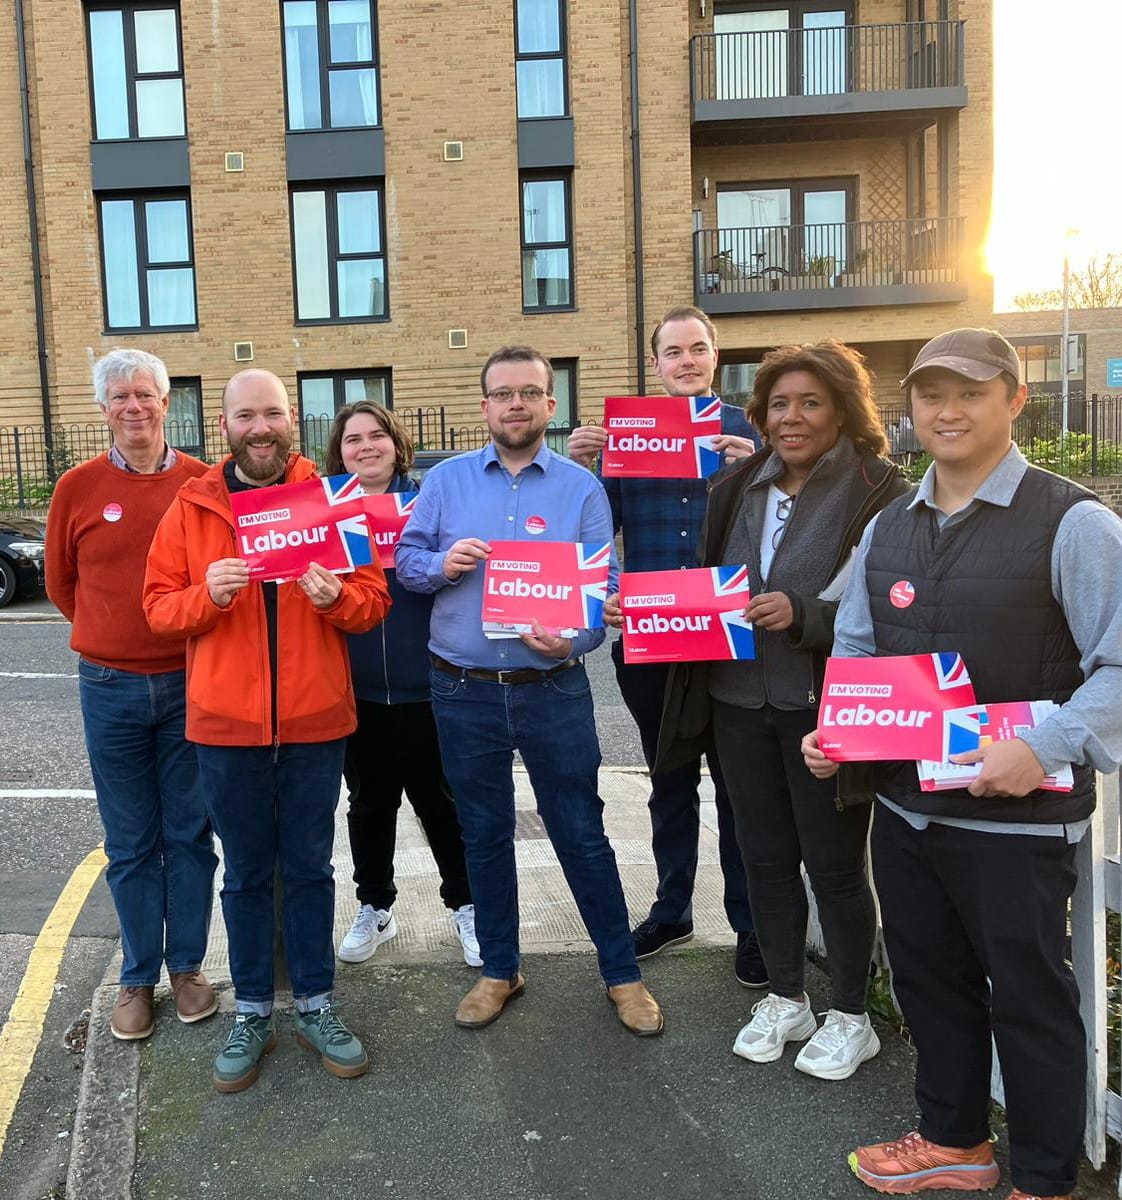 Great Peninsula team out this evening in Charlton part of our ward for @SadiqKhan @Len_Duvall @UKLabour with @dscottmcdonald @Will_nicholas - very encouraging response.